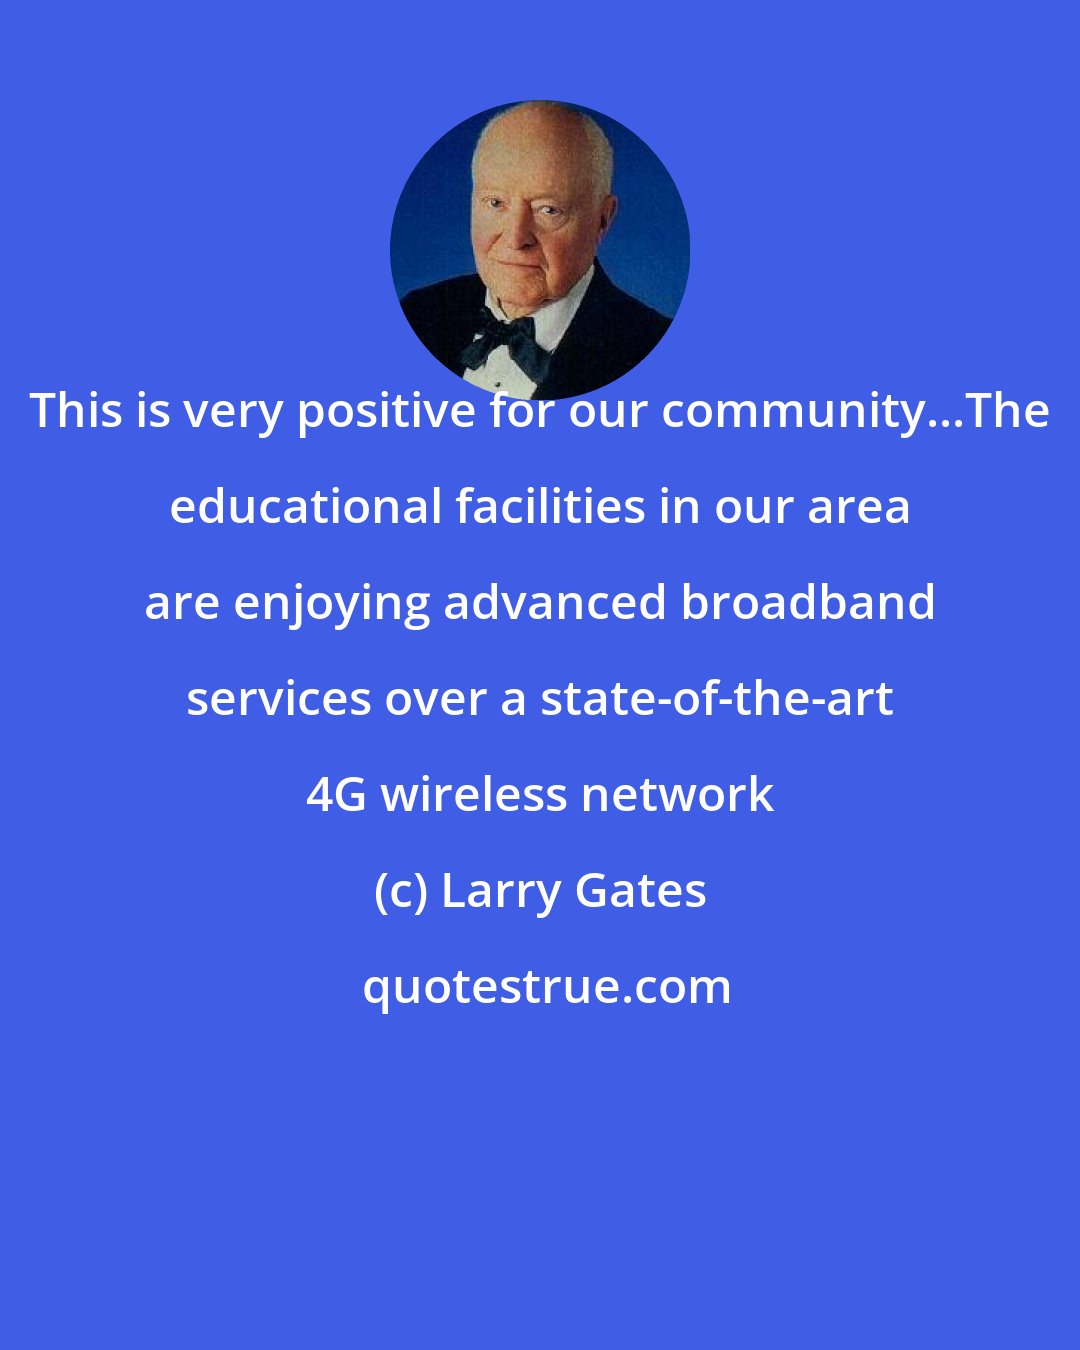 Larry Gates: This is very positive for our community...The educational facilities in our area are enjoying advanced broadband services over a state-of-the-art 4G wireless network